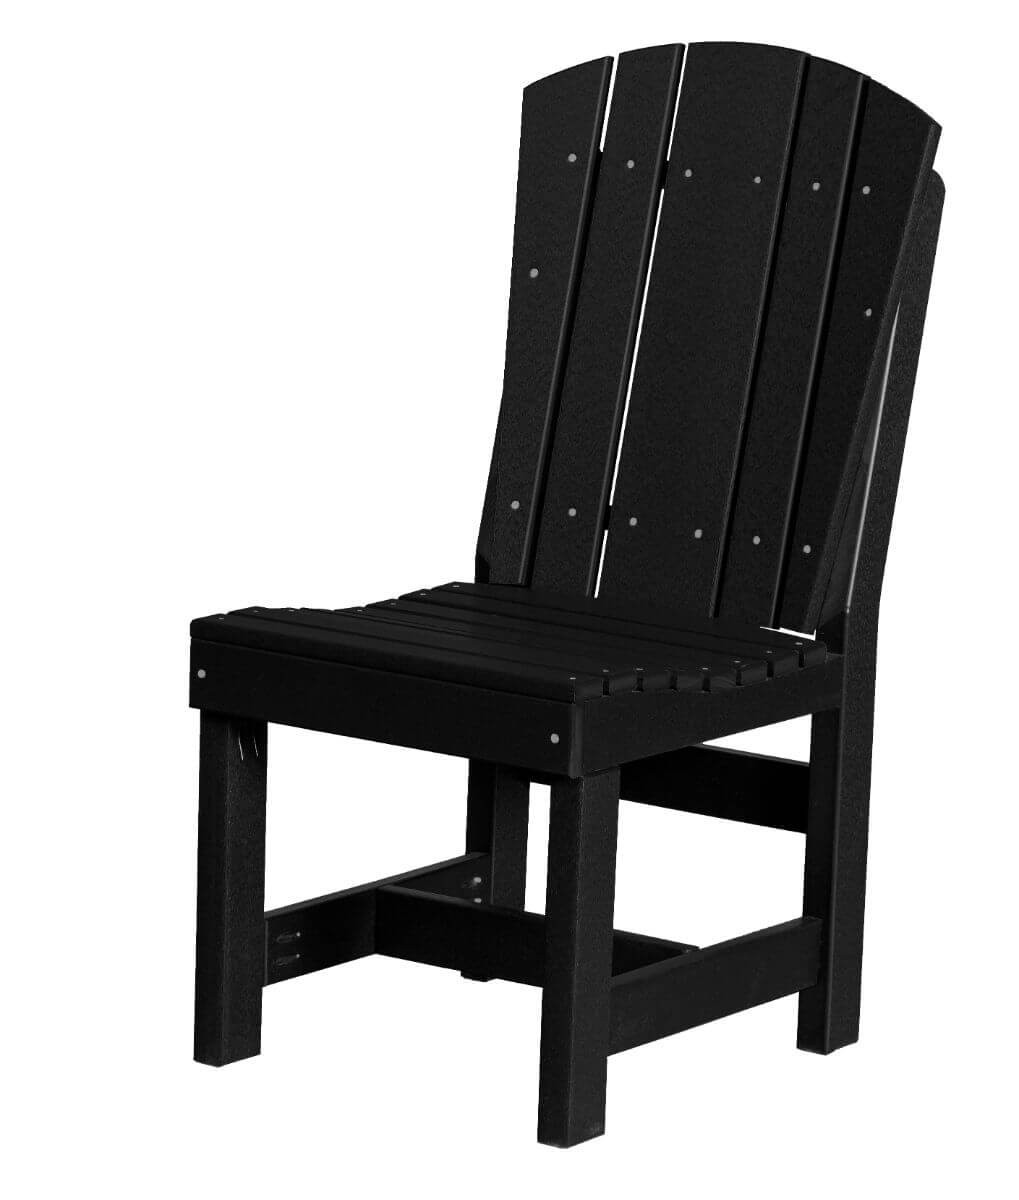 Black Oristano Outdoor Dining Chair